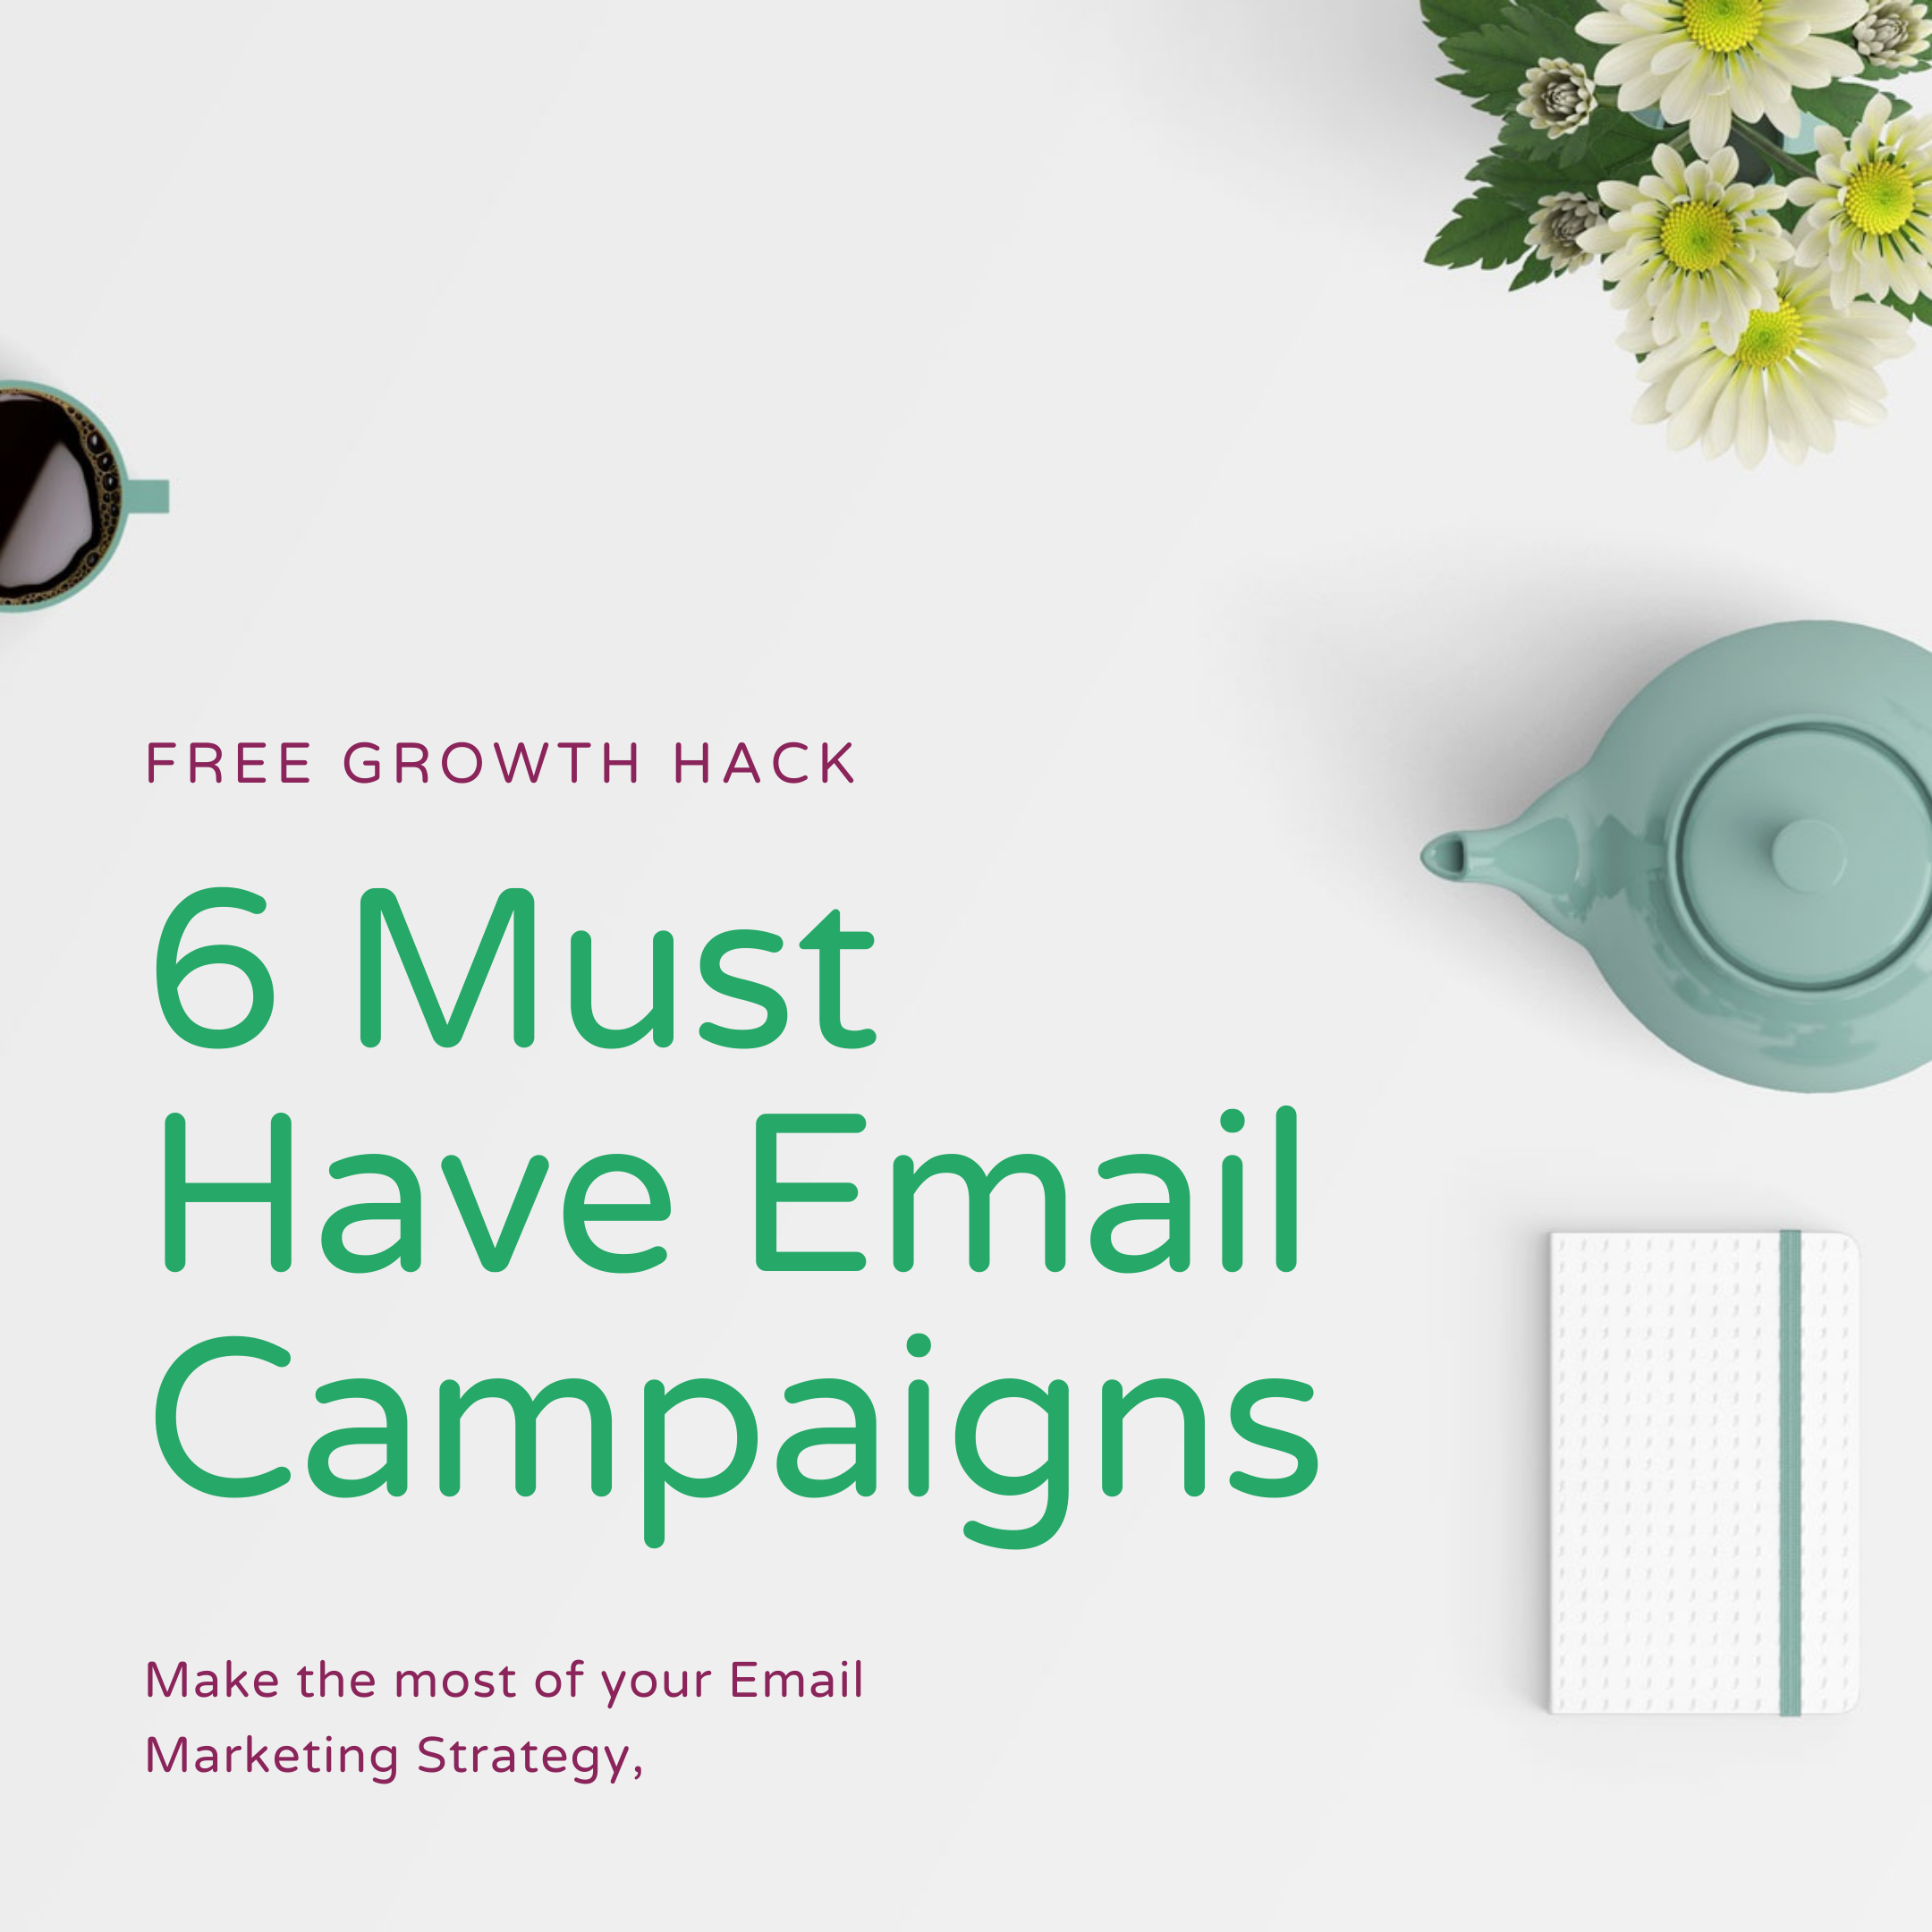 6 Must Have Email Campaign Strategies